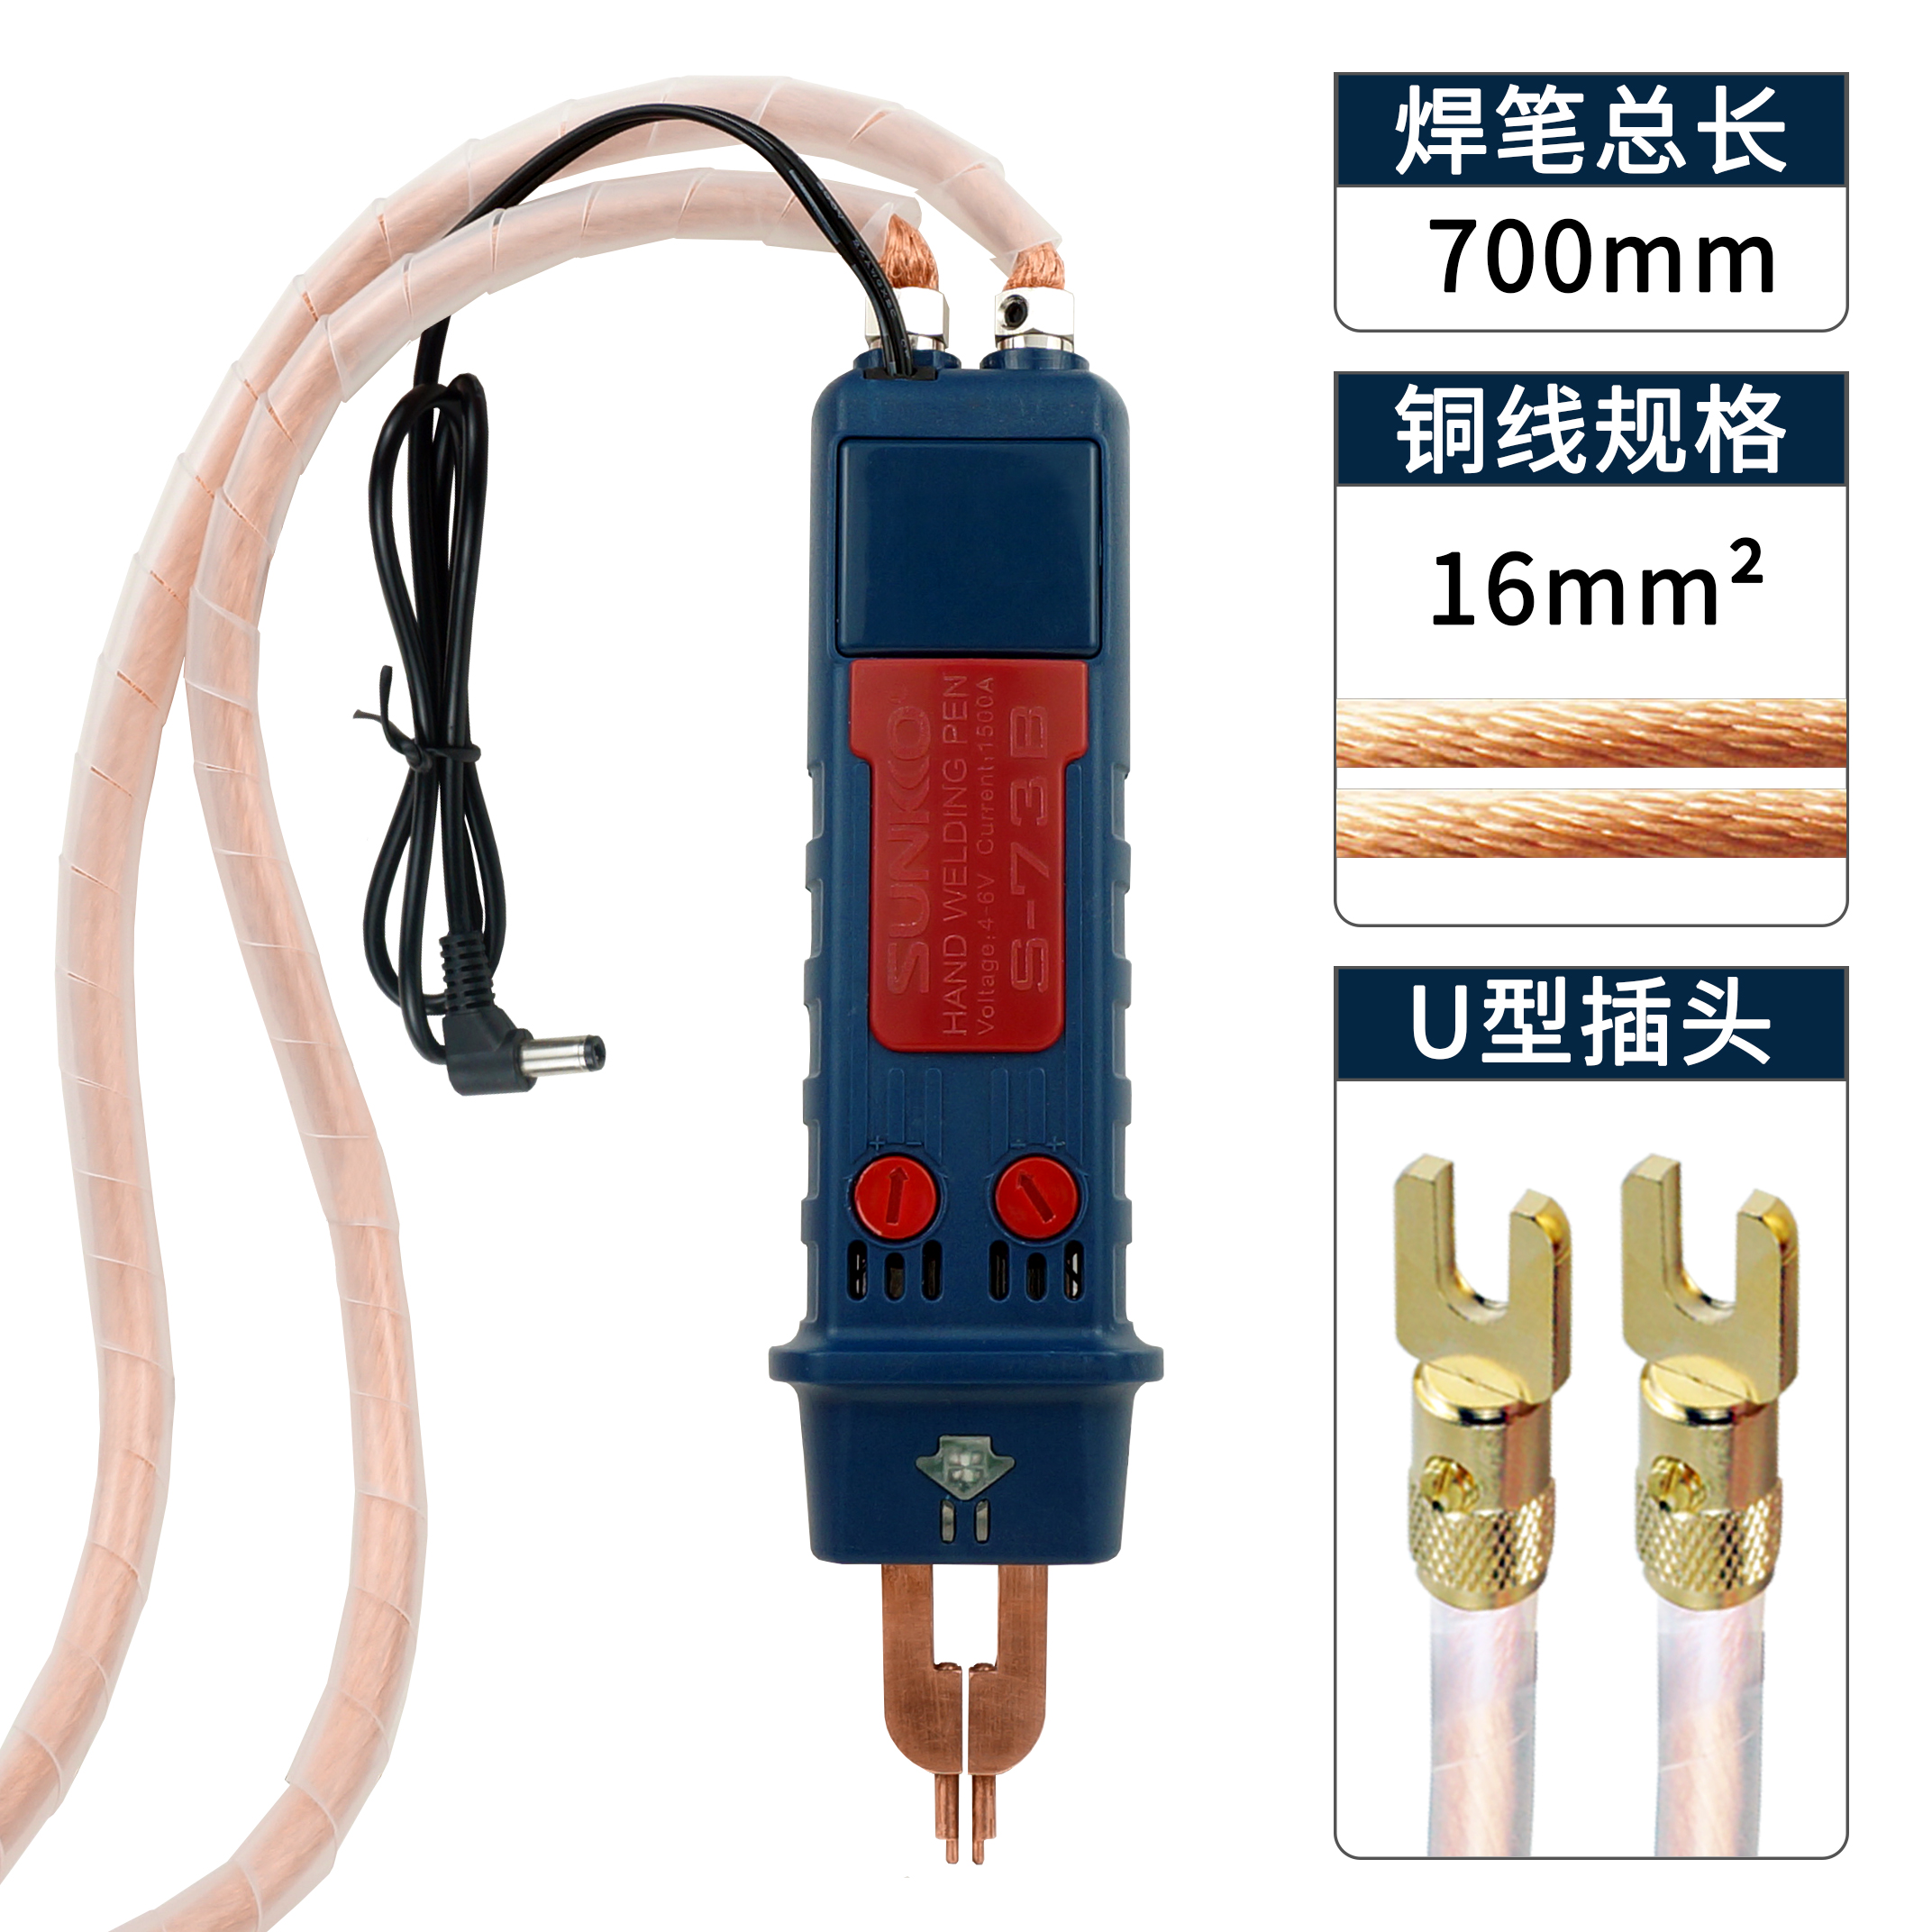 73B Soldering Pen (16 Square Copper Wire + U-type Plug)SUNKKO71A Single handhold  components and parts hardware Battery mash welder  welding lithium battery nickel